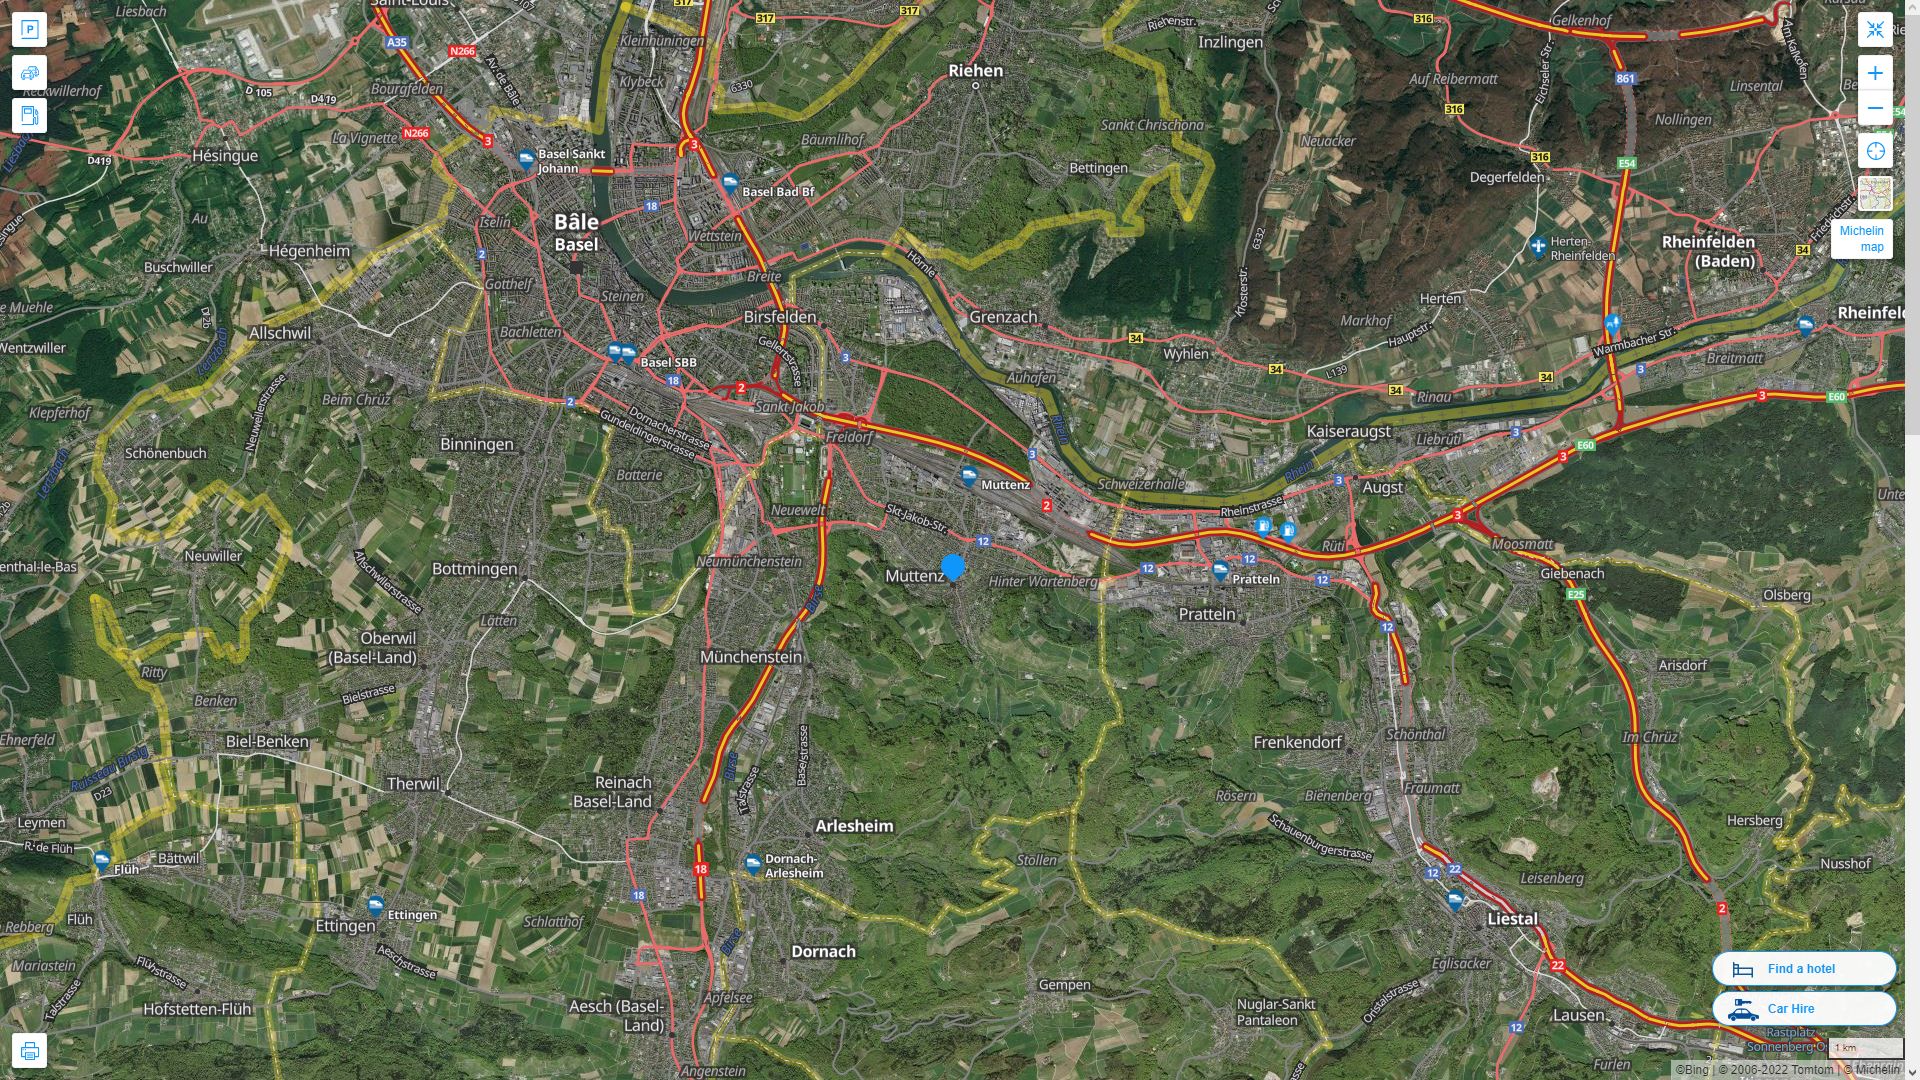 Muttenz Highway and Road Map with Satellite View